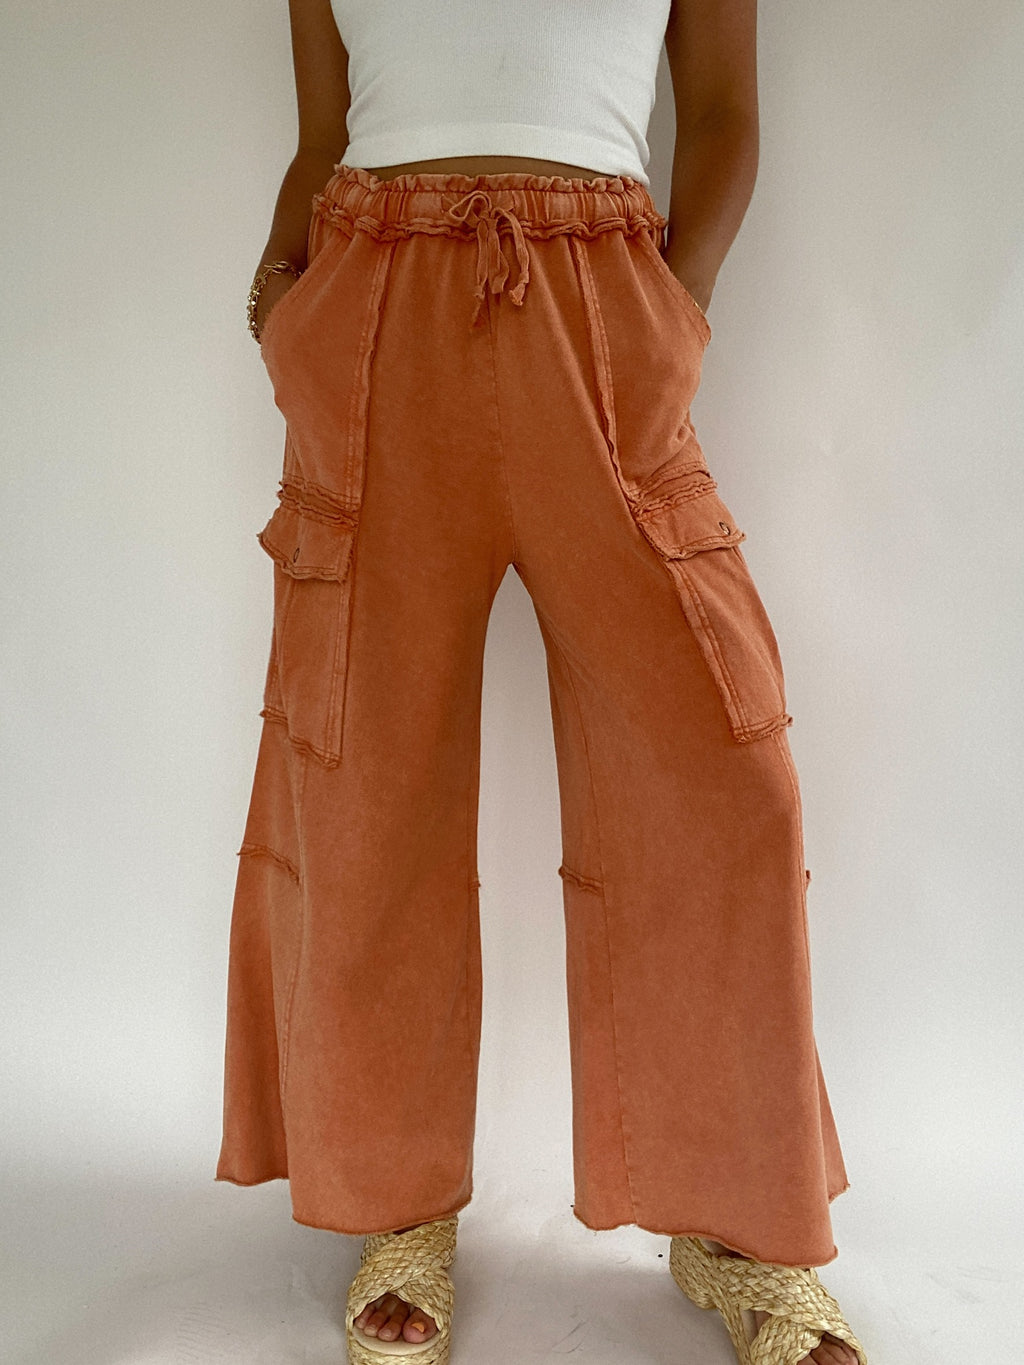 Middle Of The Road Pants - Rust